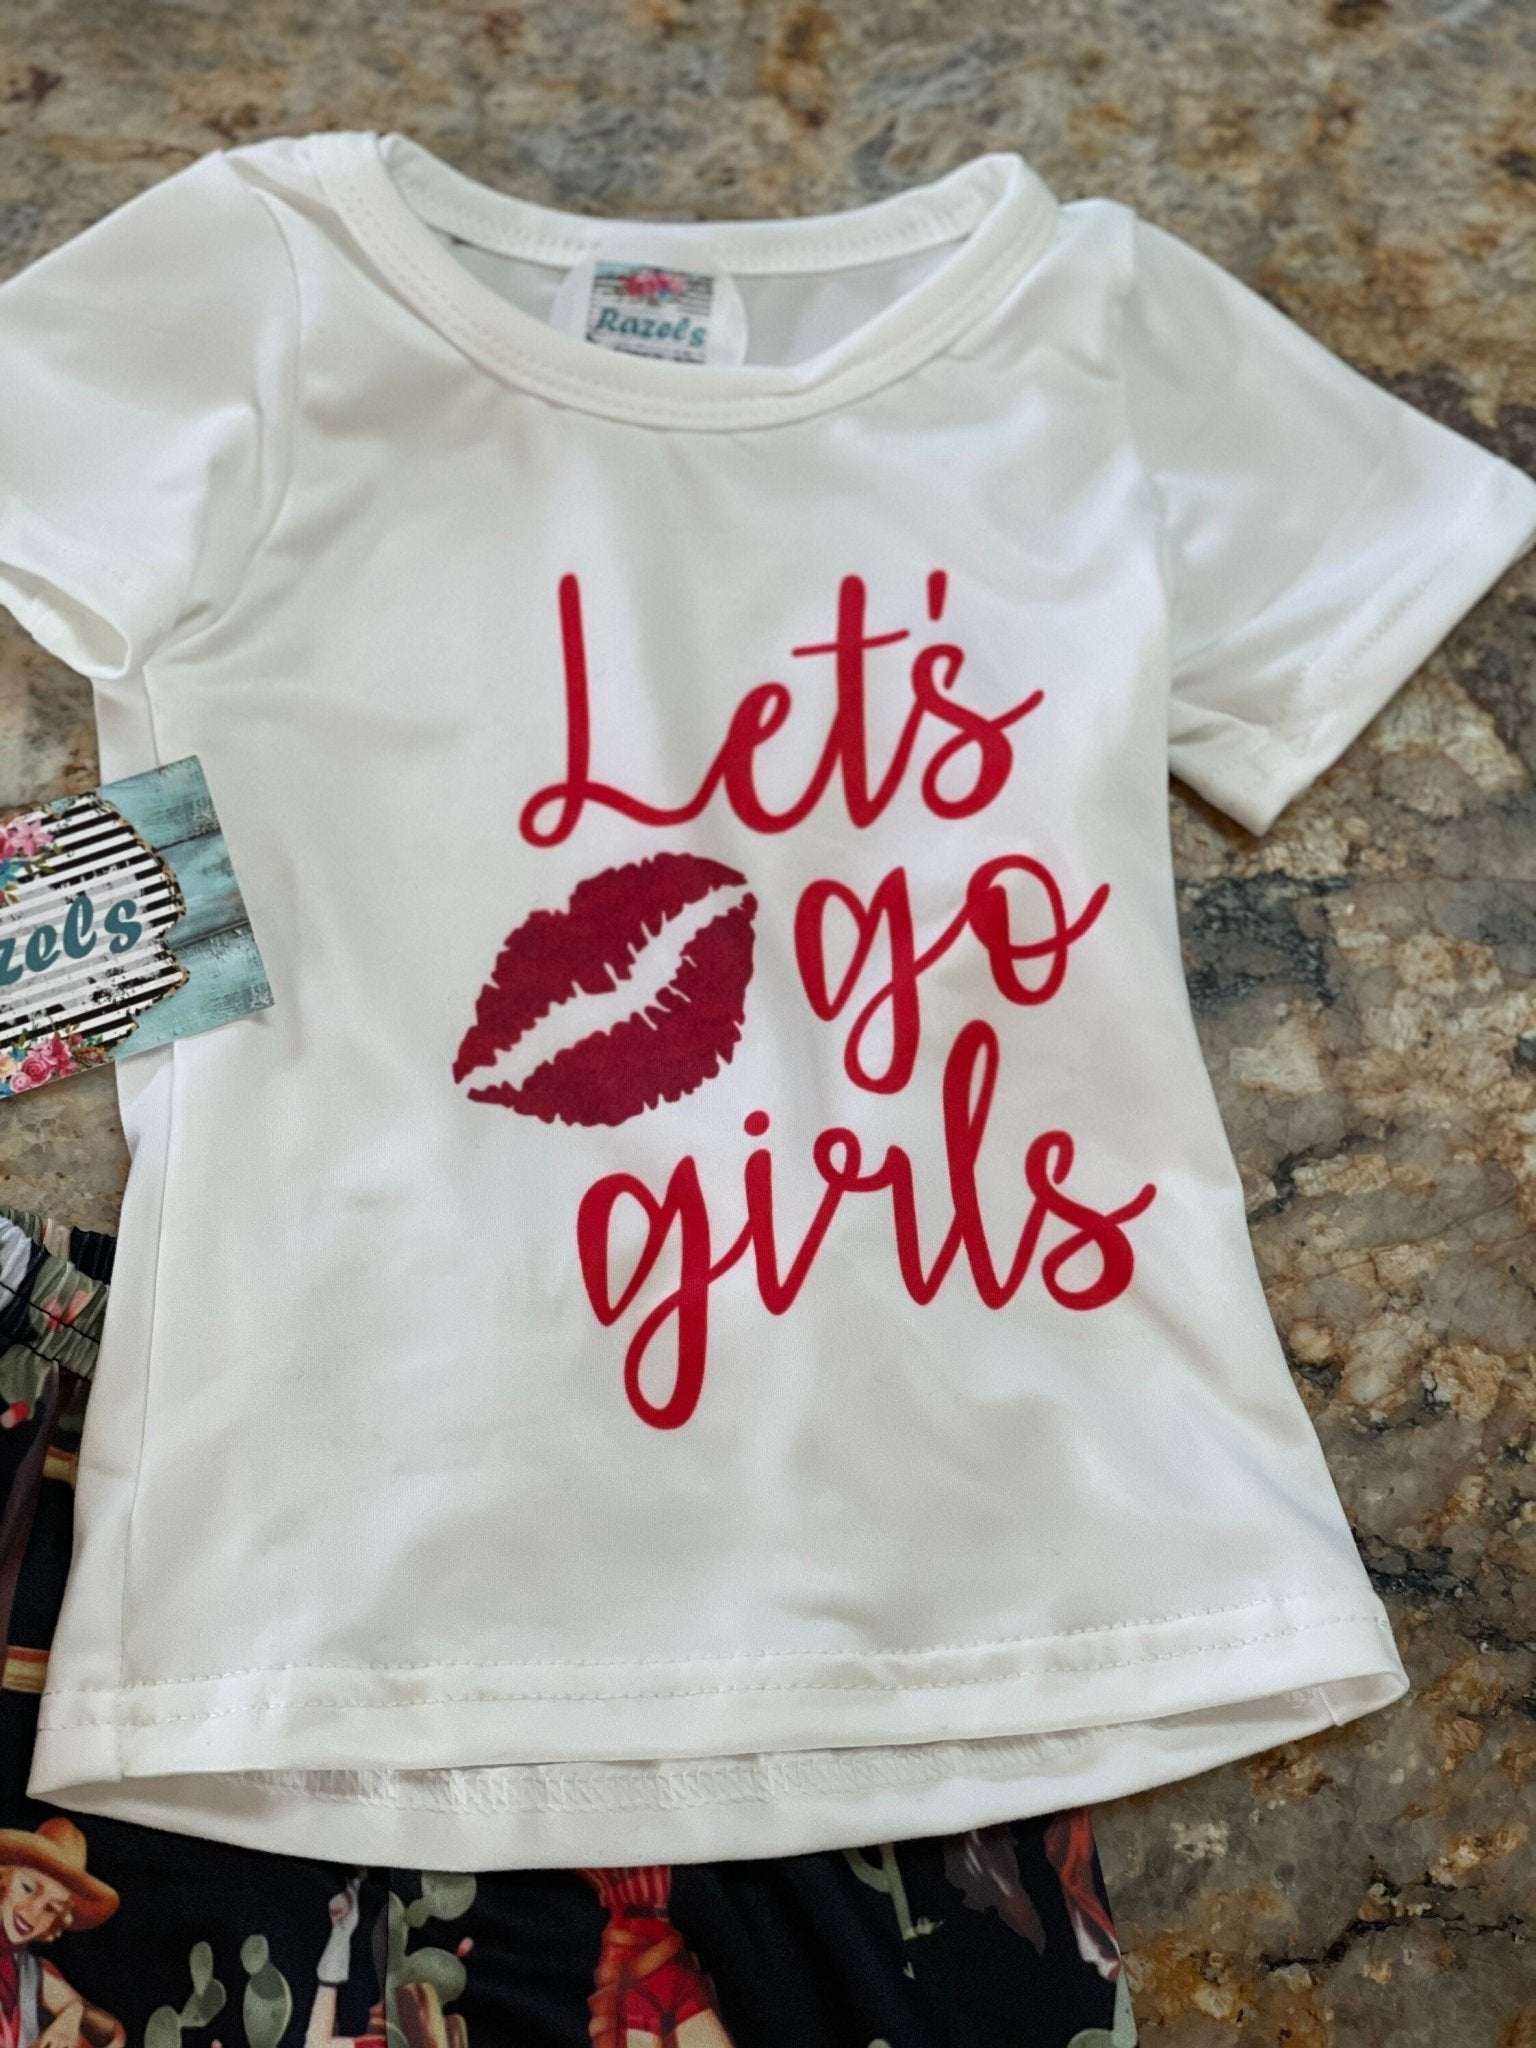 Let’s Go Girls Bell Bottom Outfit, VINTAGE COWGIRL Flares Tee - Razels